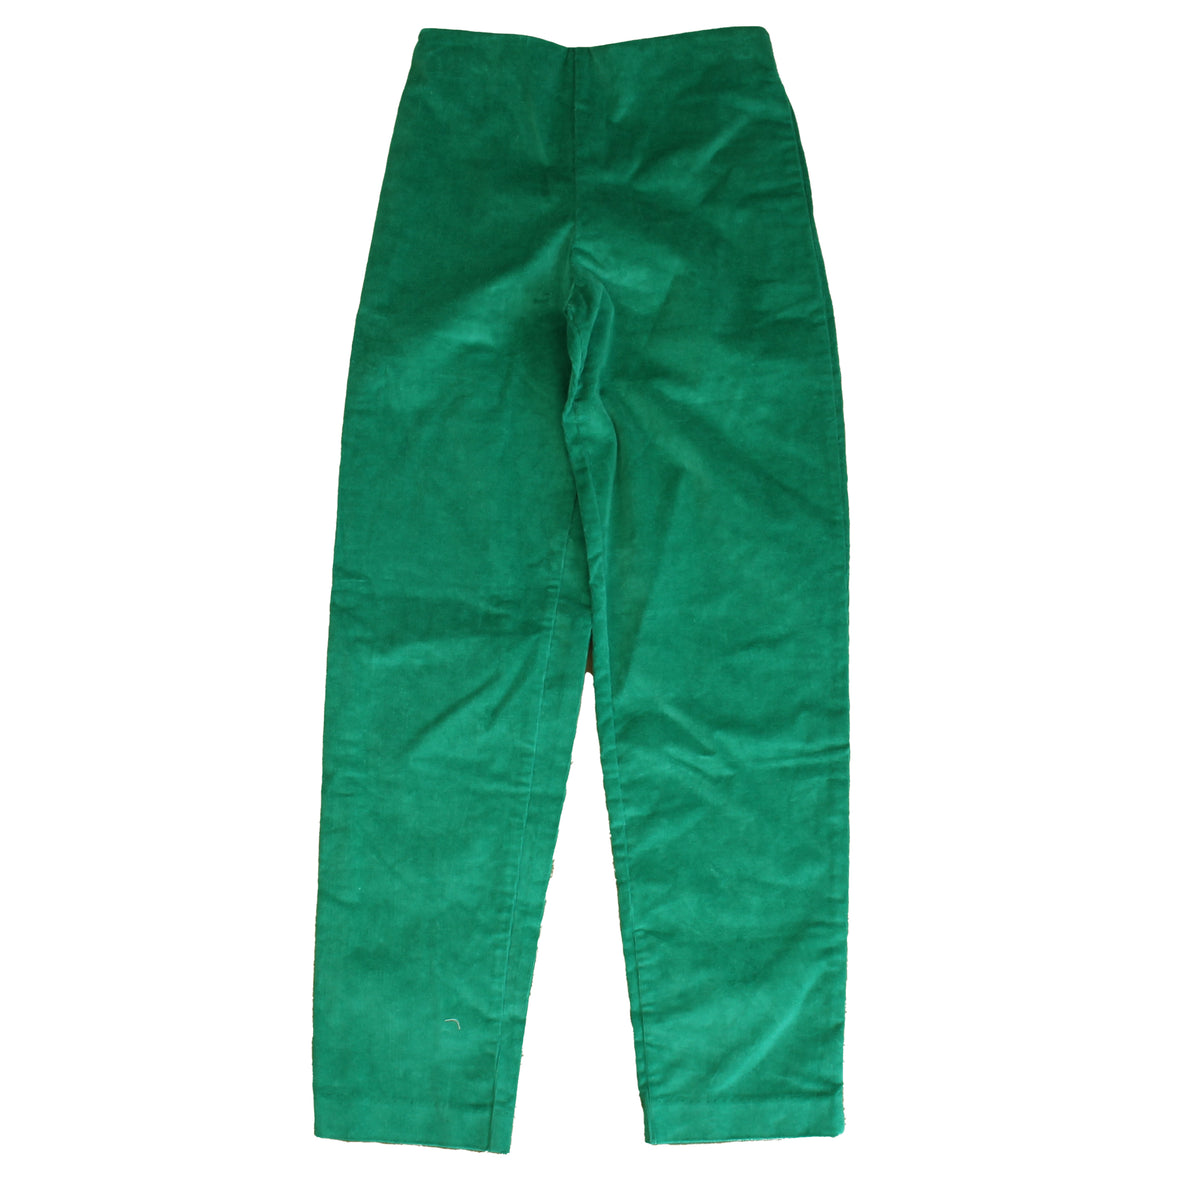 New with Tags: Green Pants size: 6-14 Years -- FINAL SALE